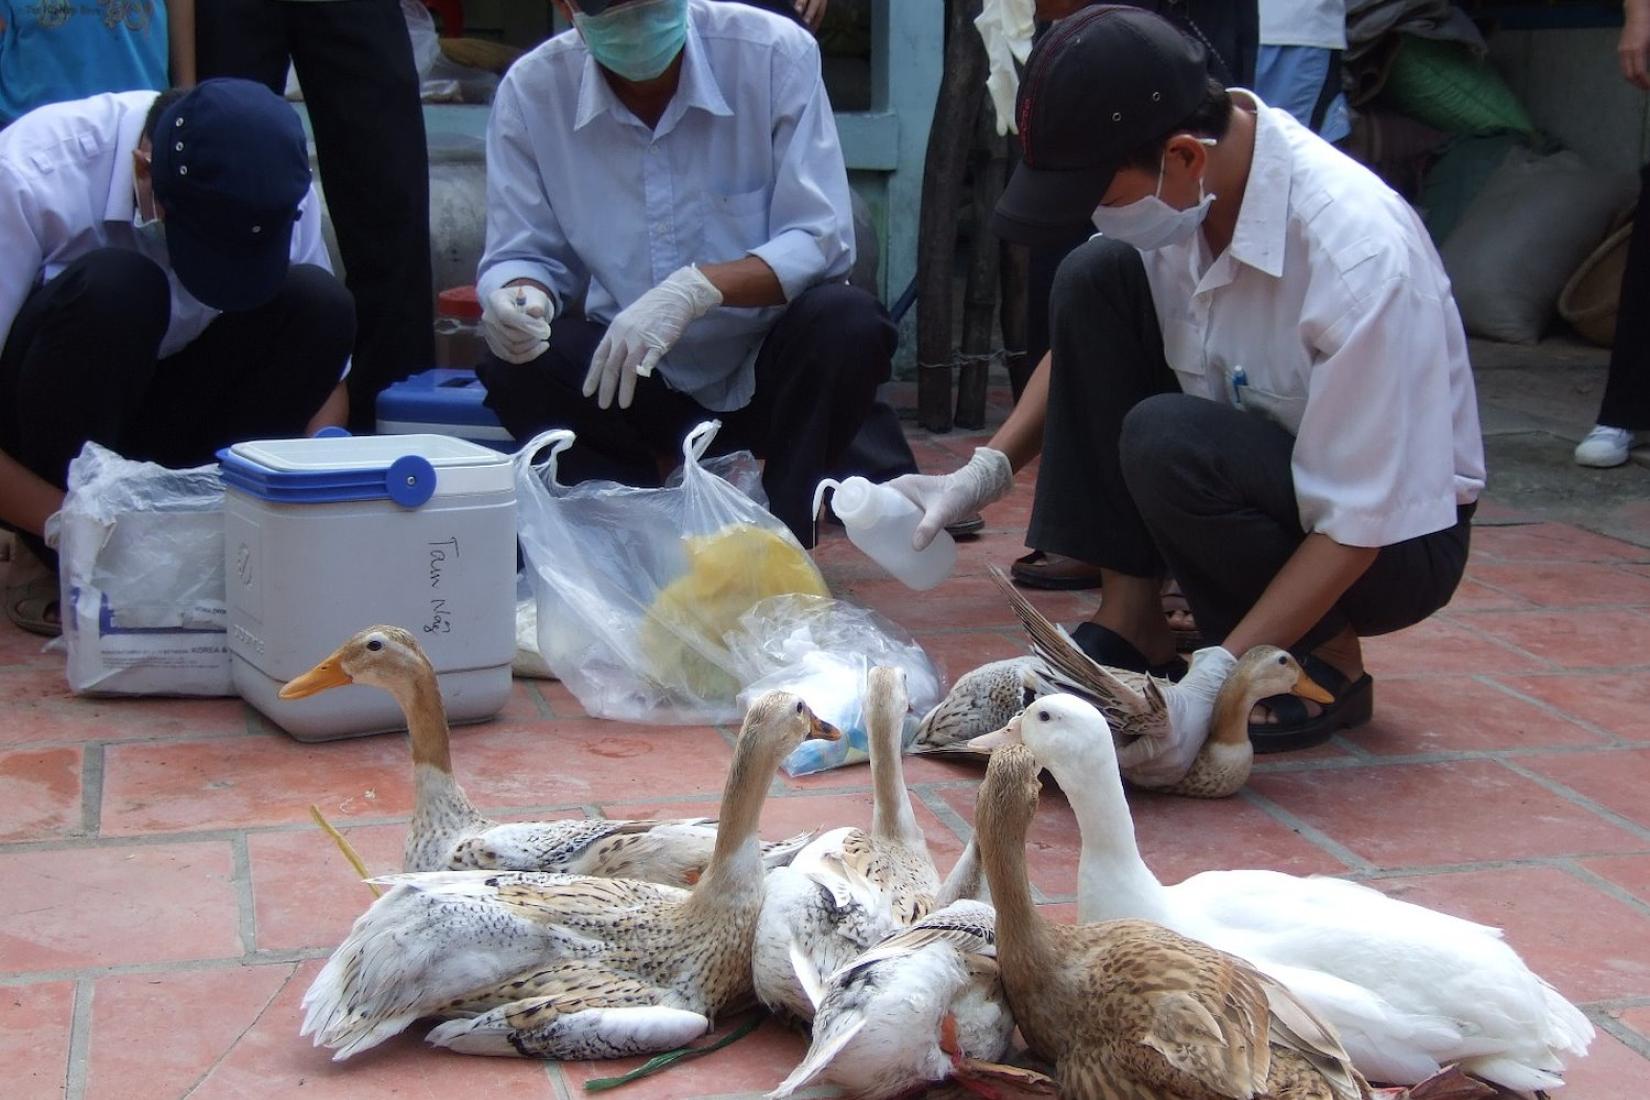 Group of ducks next to a group of men with face masks and rubber gloves